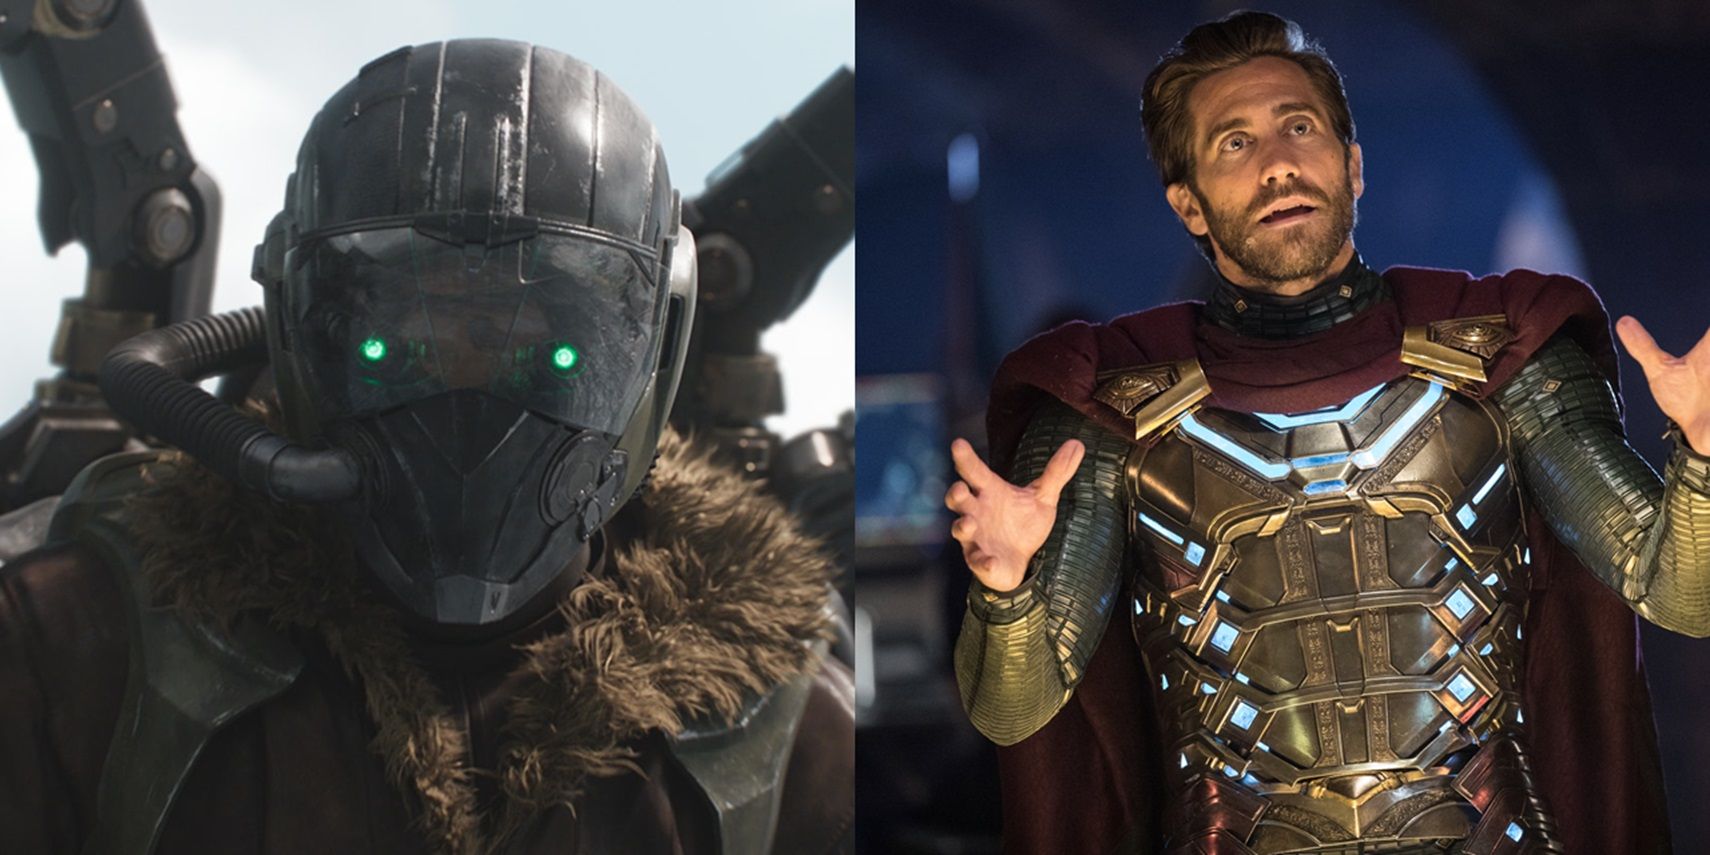 The Vulture flying in Spider-Man: Homecoming and an unmasked Mysterio in Spider-Man Far From Home.